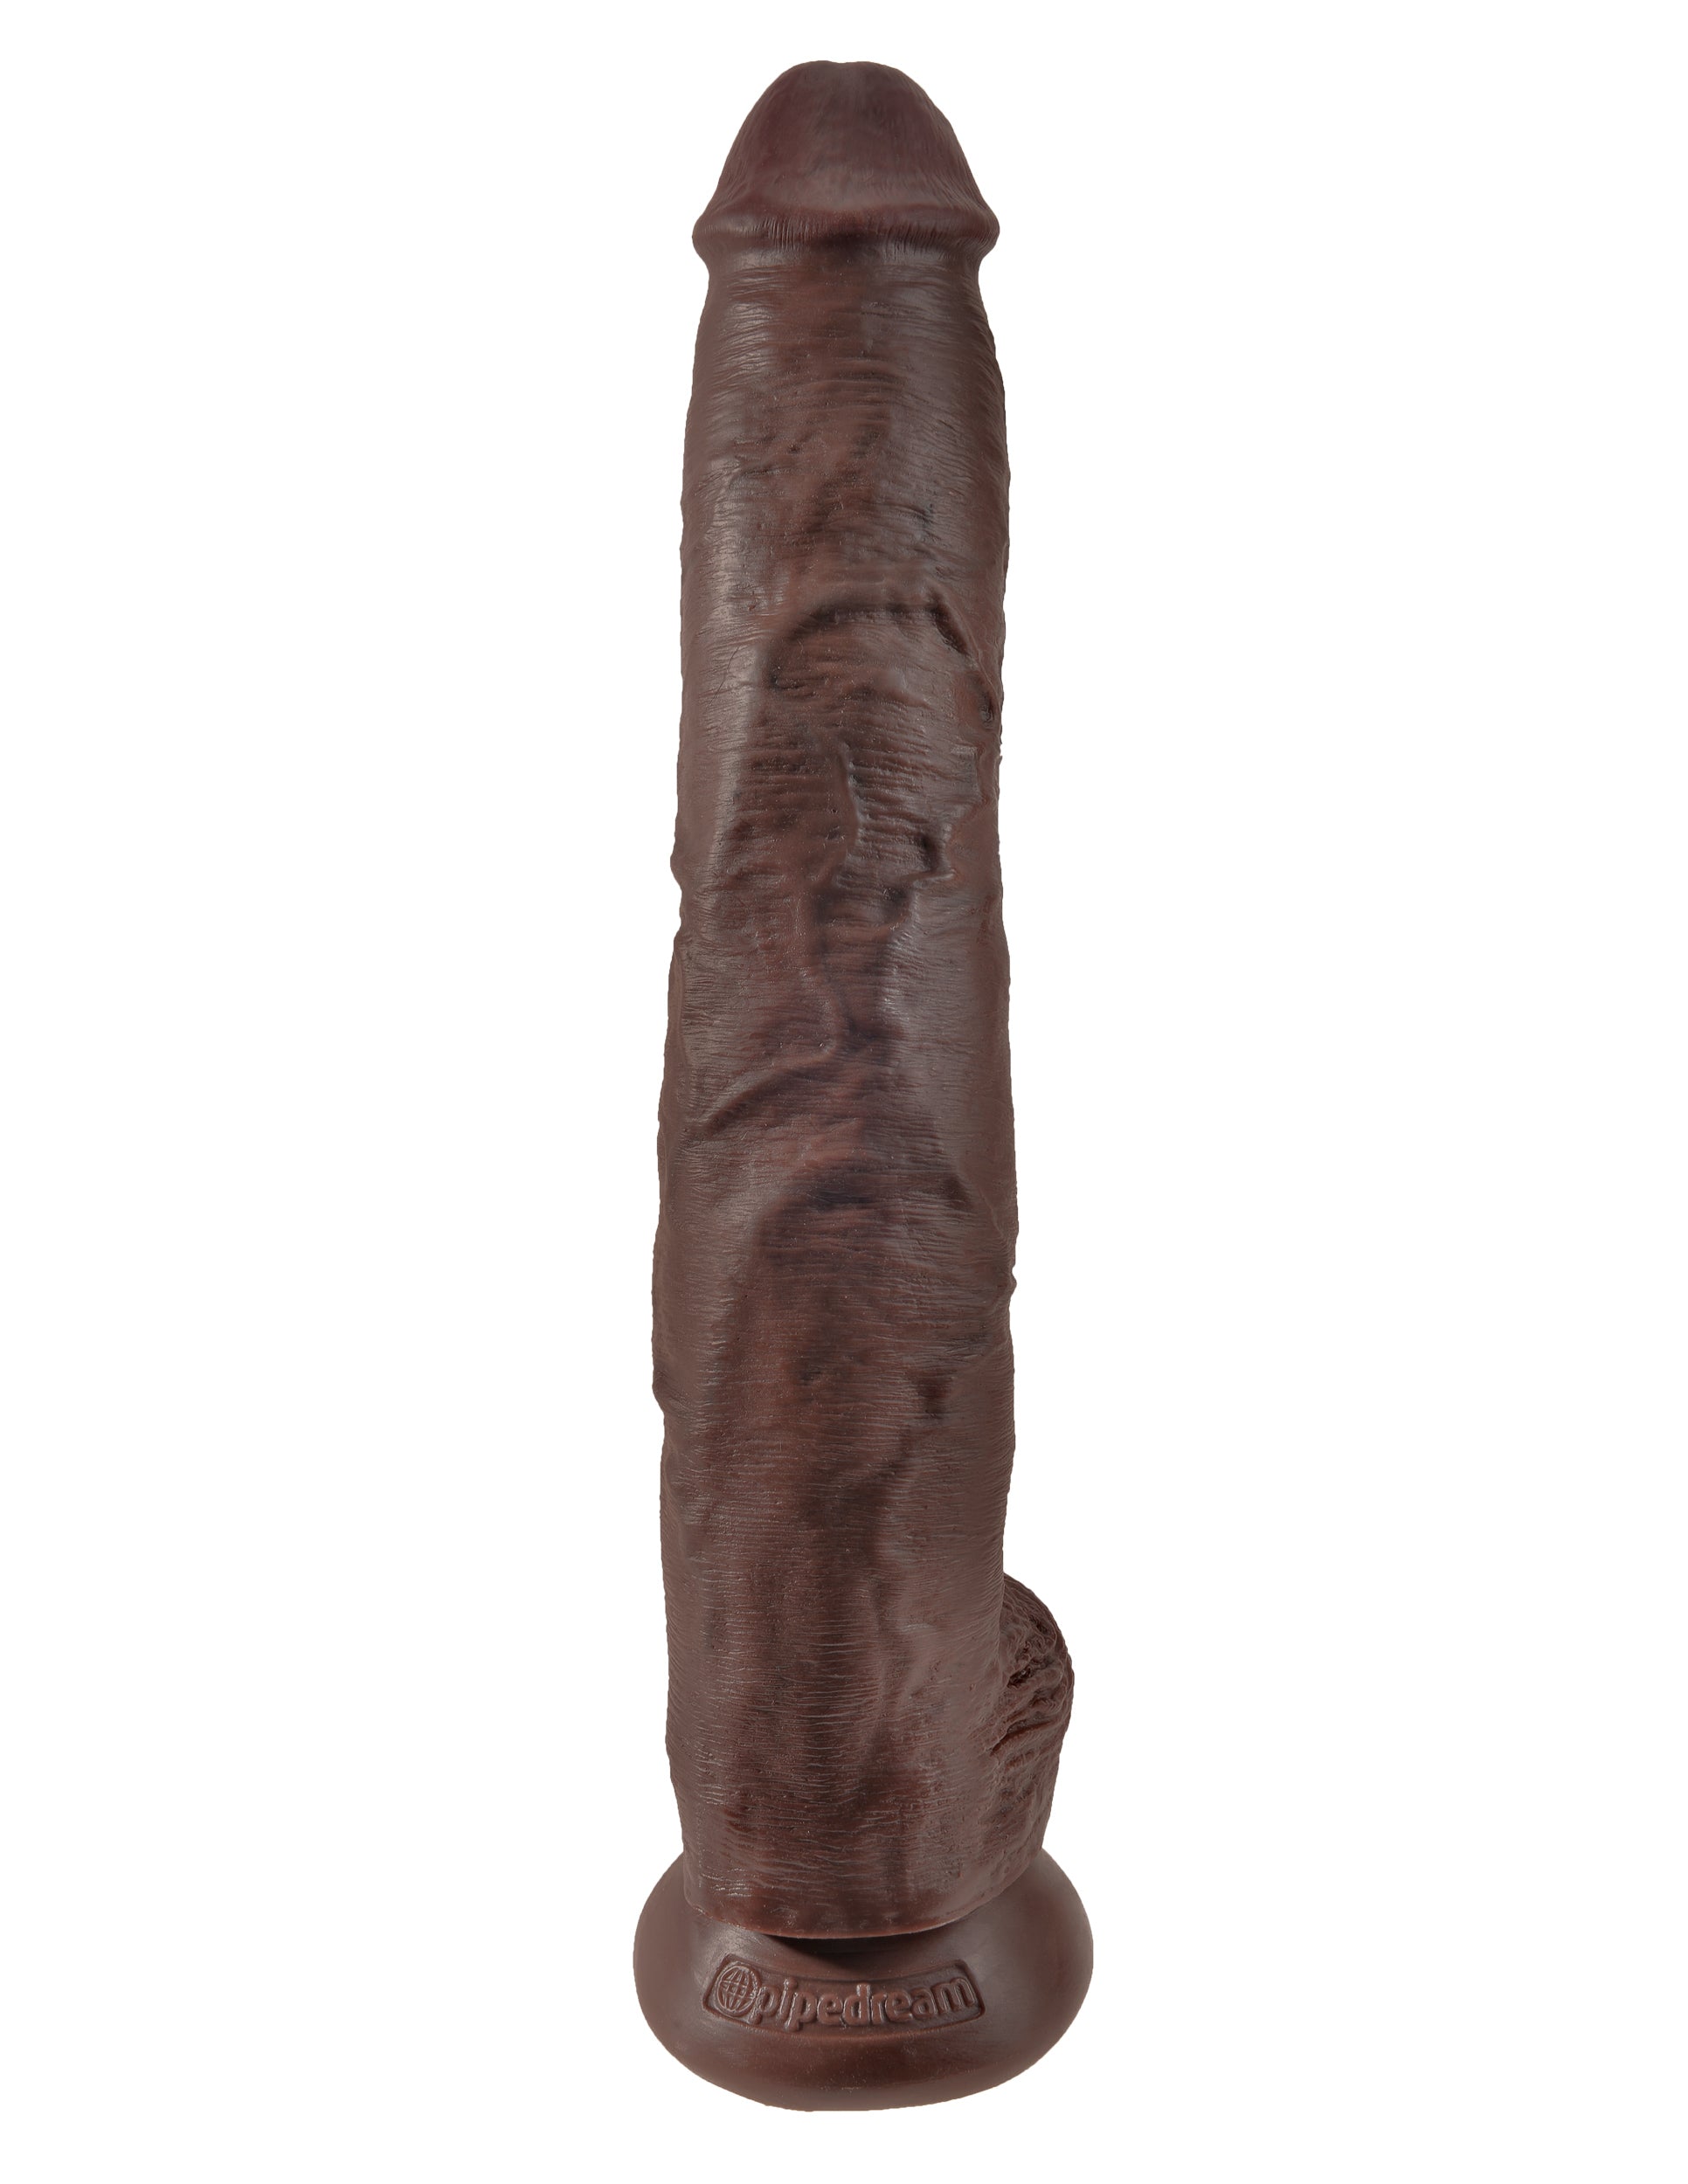 King Cock 14 Inch Cock With Balls - Brown-2